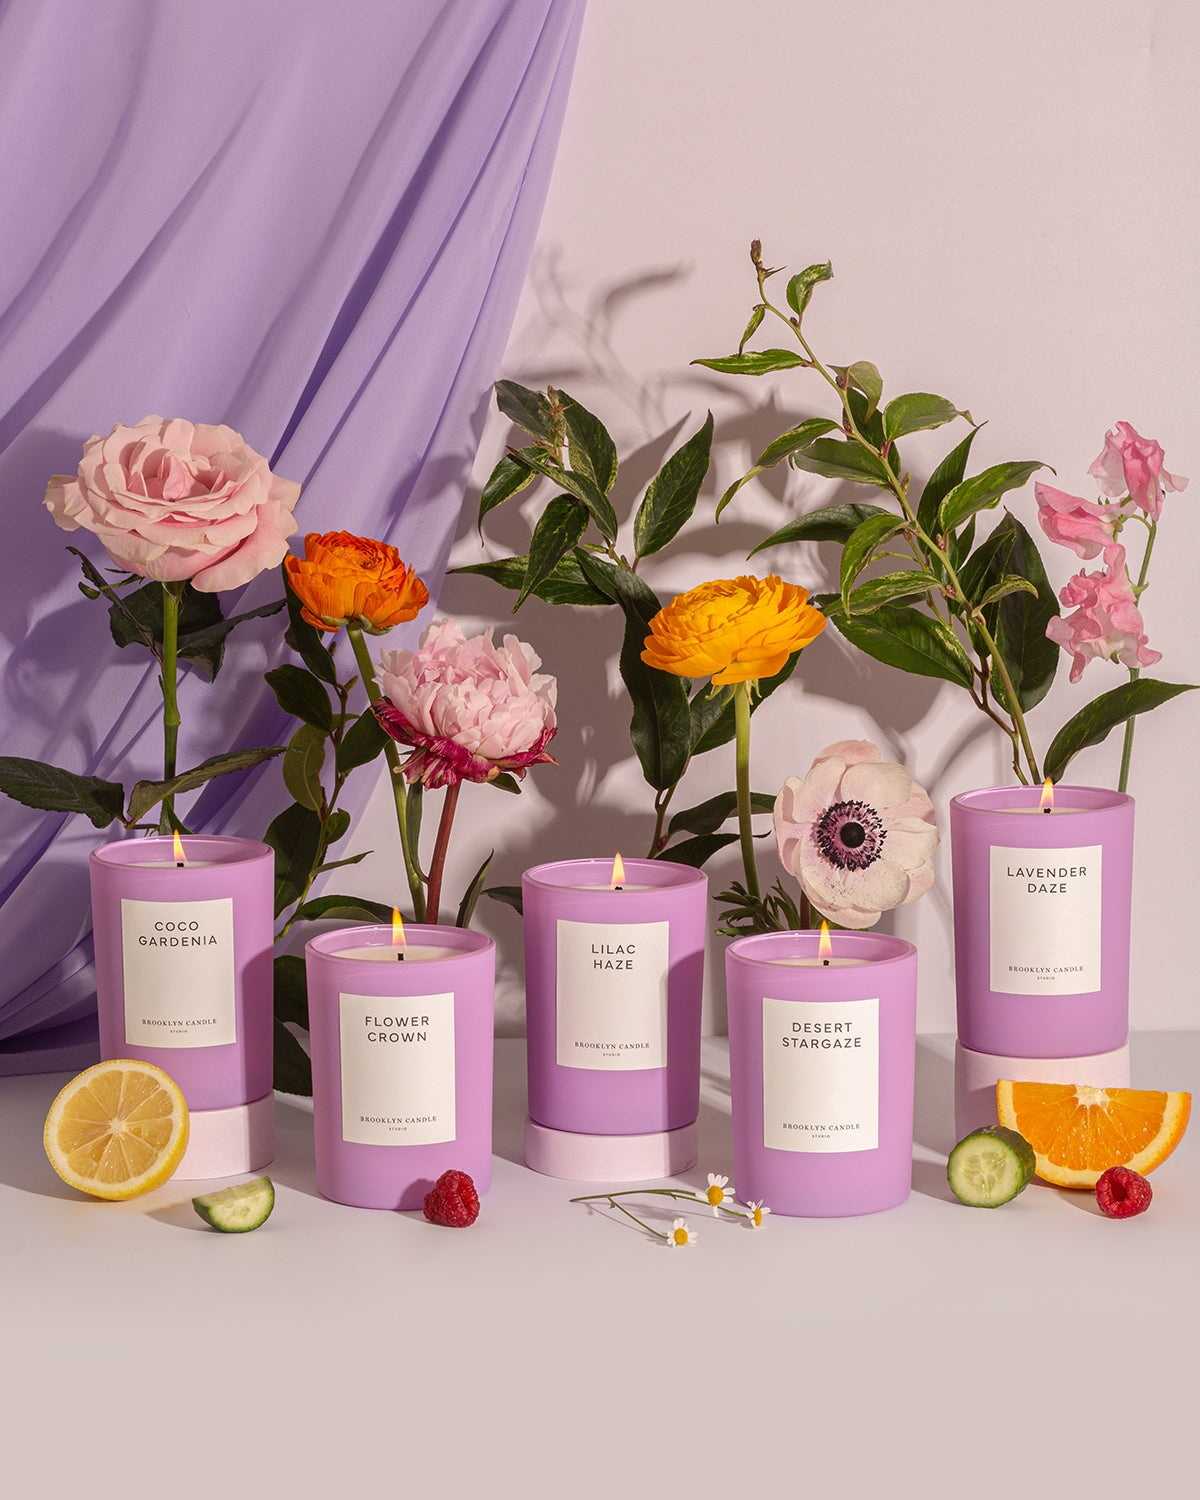 Coco Gardenia Limited Edition Candle Lilac Haze Collection Brooklyn Candle Studio 